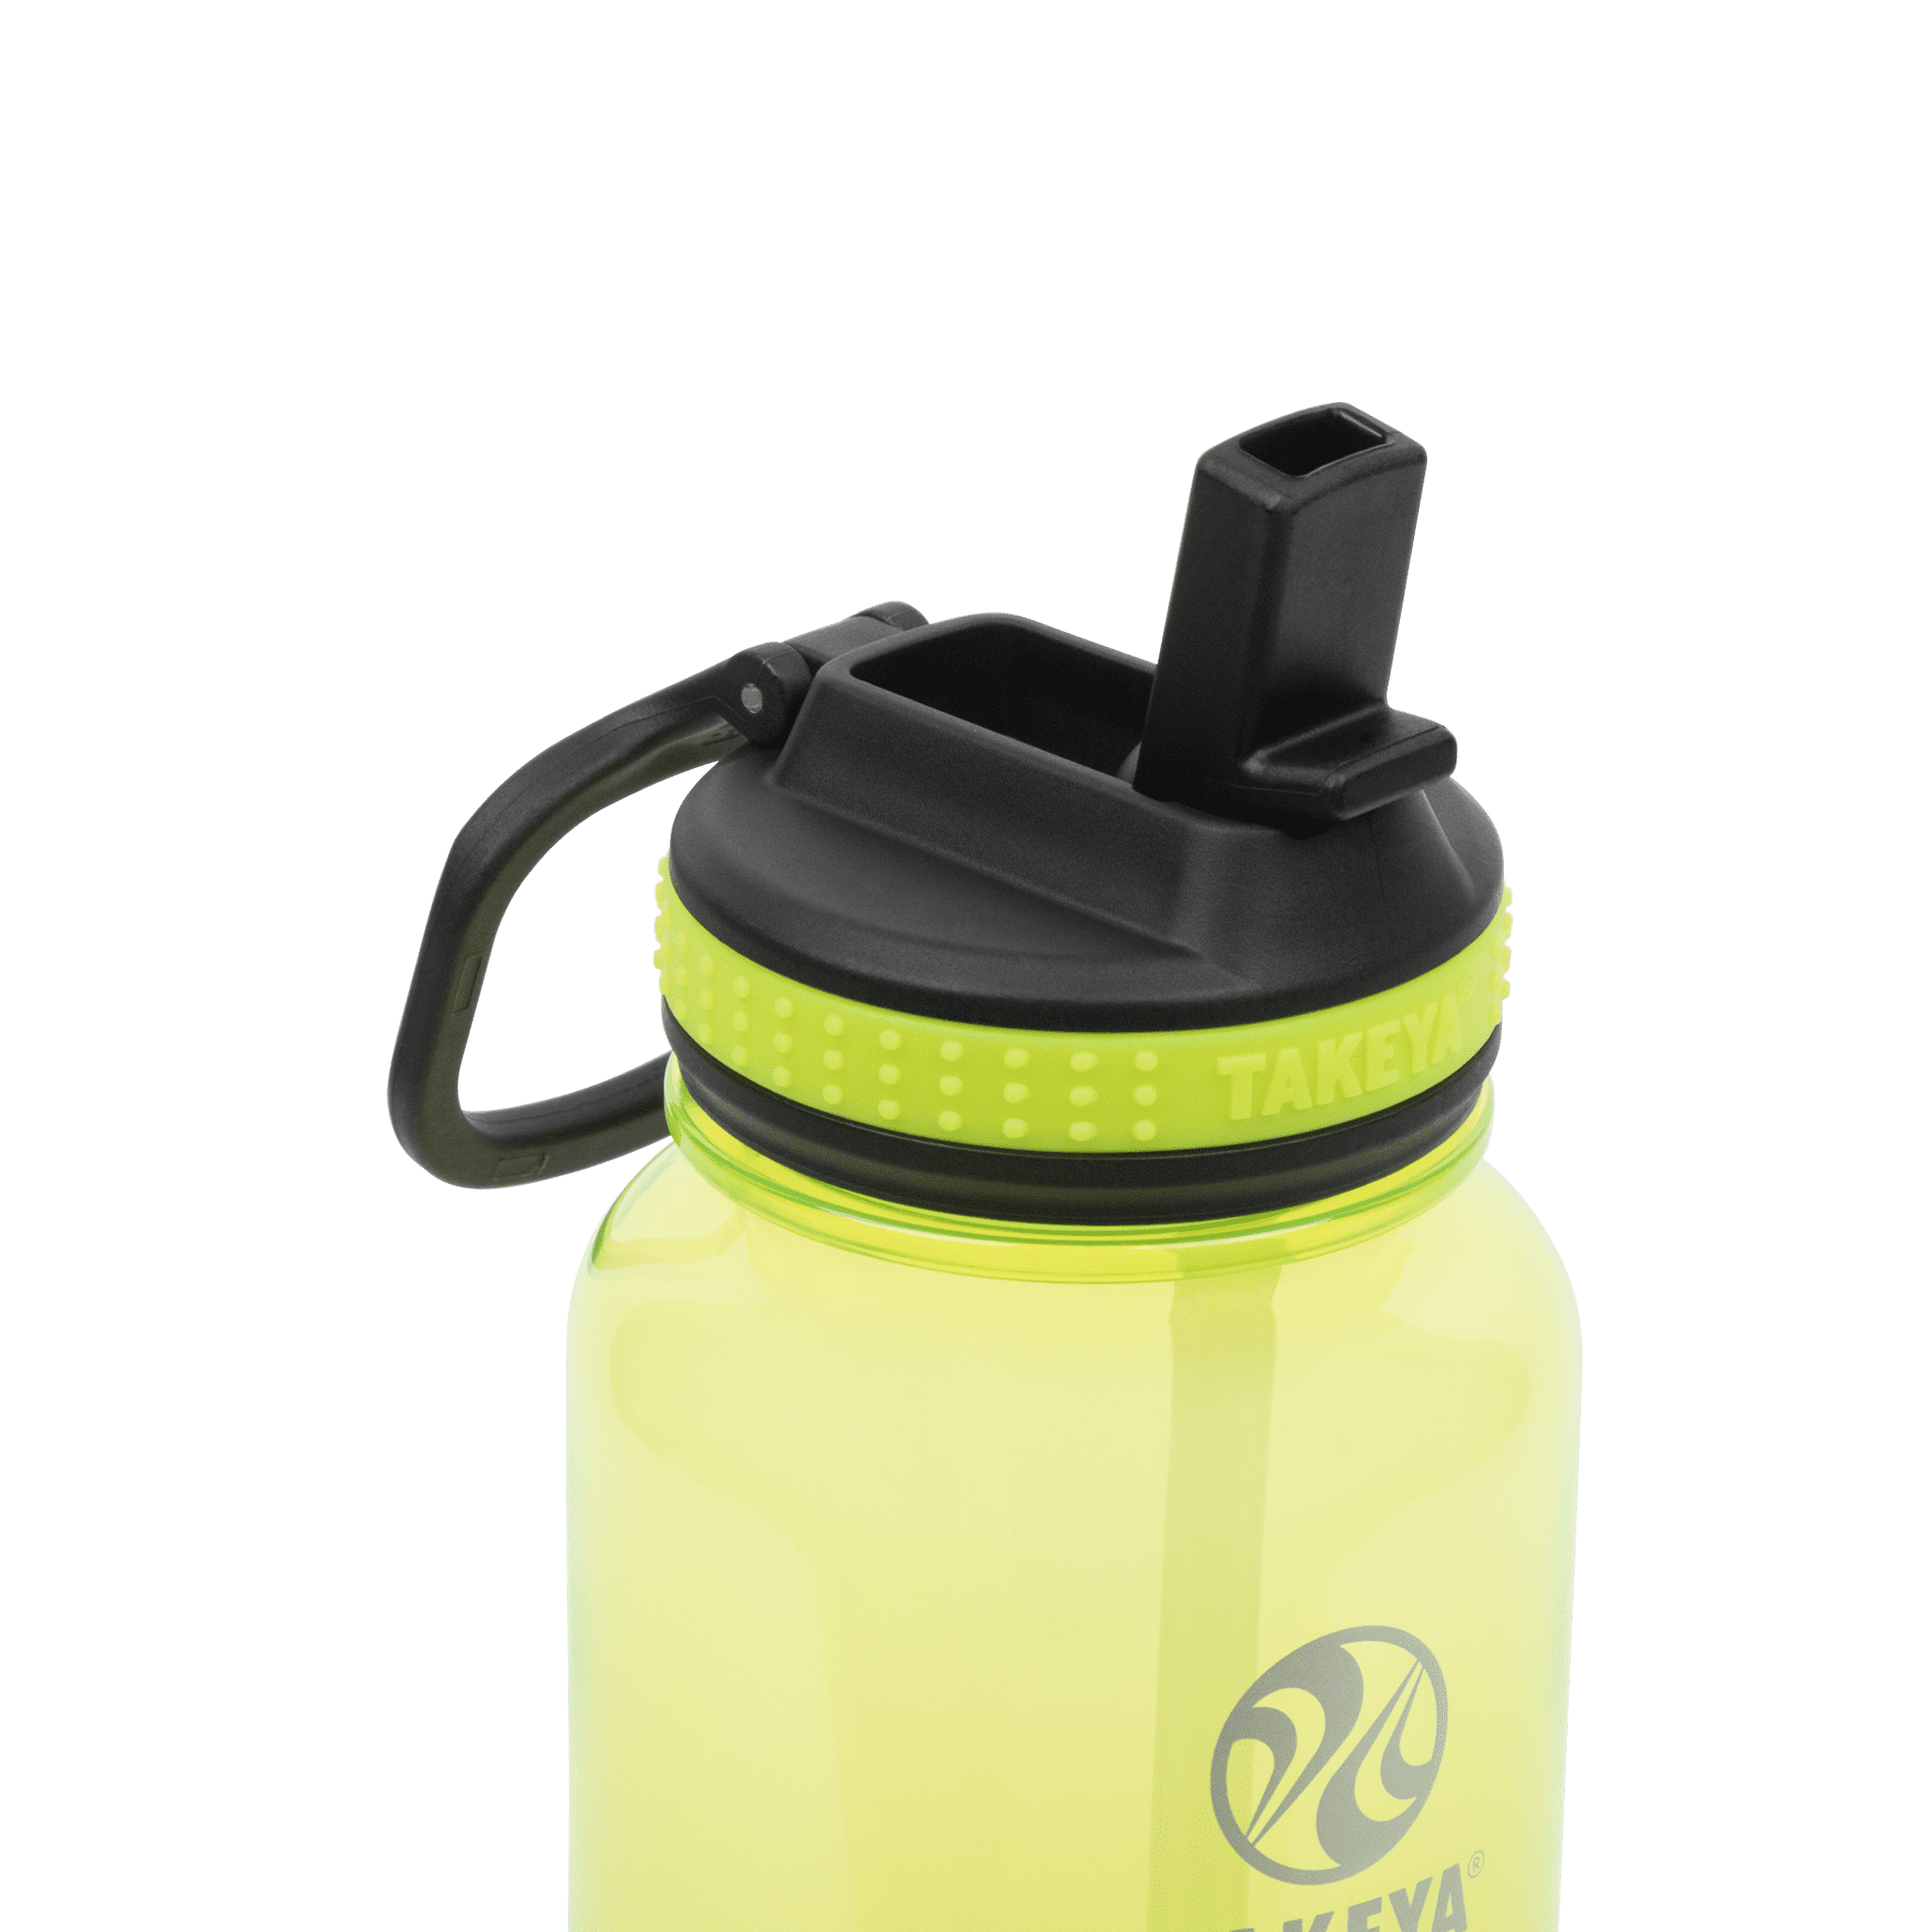 Made Easy Kit Tritan Plastic Water Bottle - Revolutionary Lid, Wide and Narrow Mouth openings - BPA Free Water Bottle, Dishwasher Safe Large (32oz)